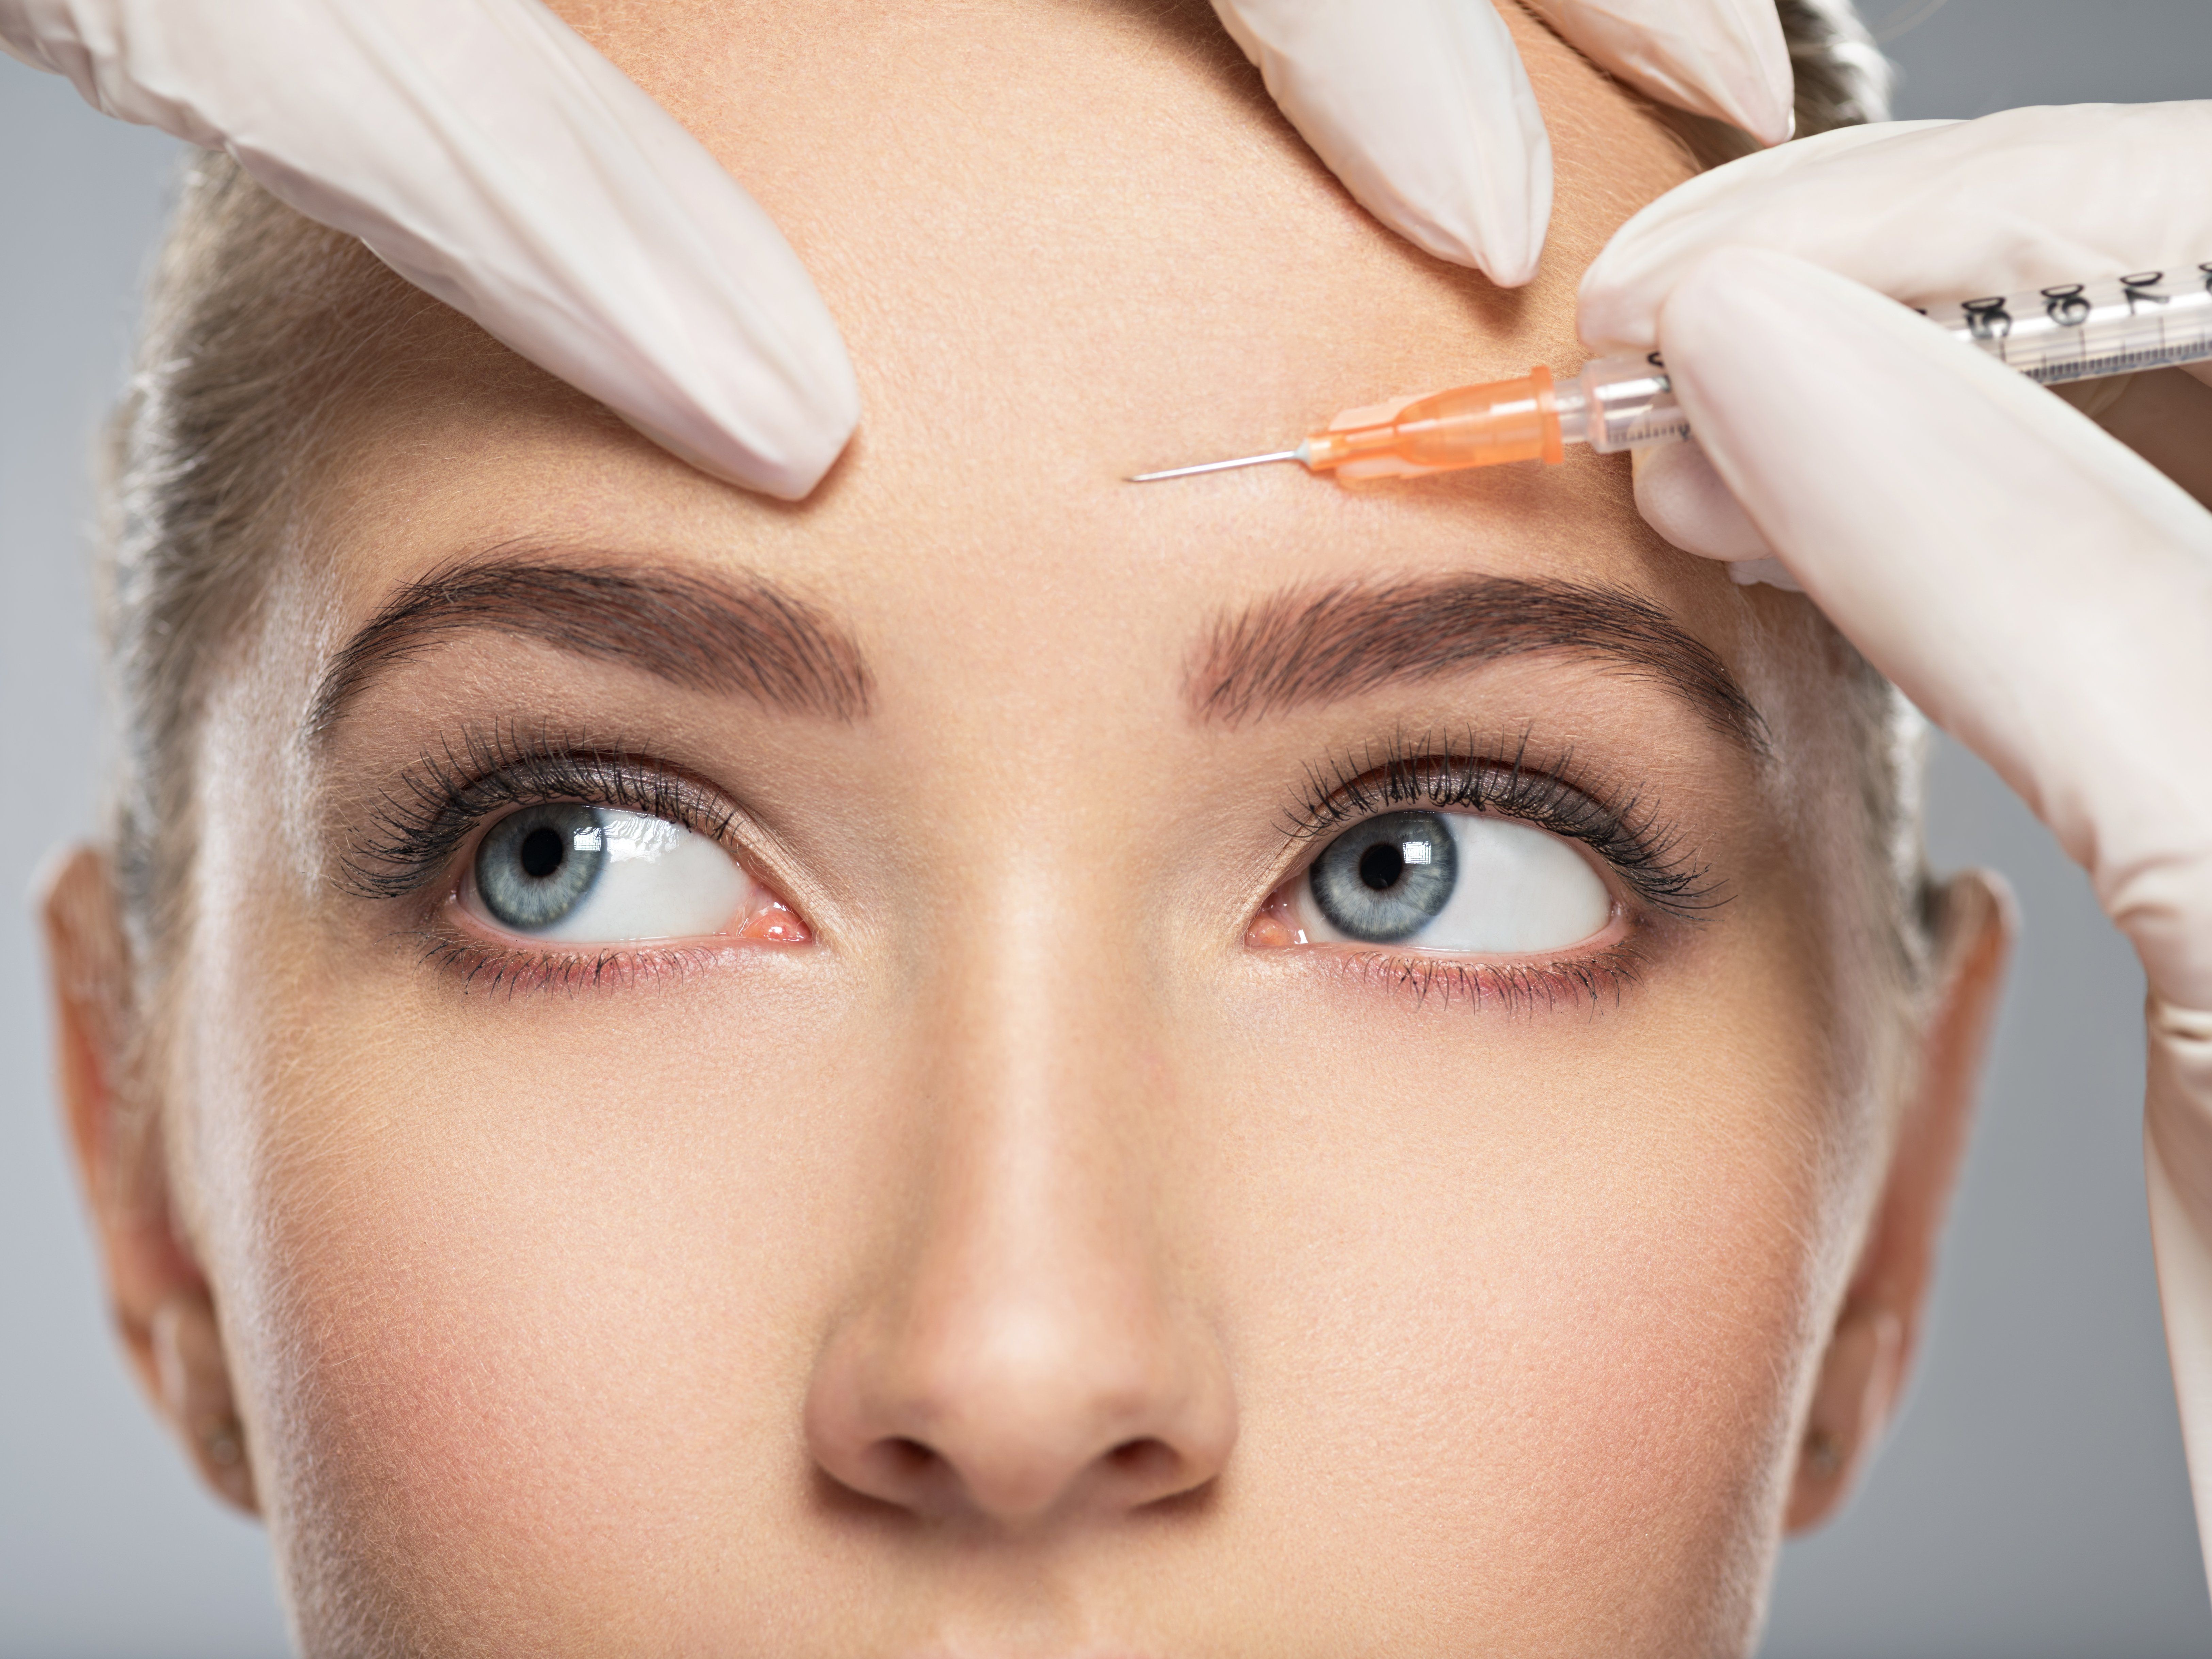 Can Botox Be Used as a Preventative?